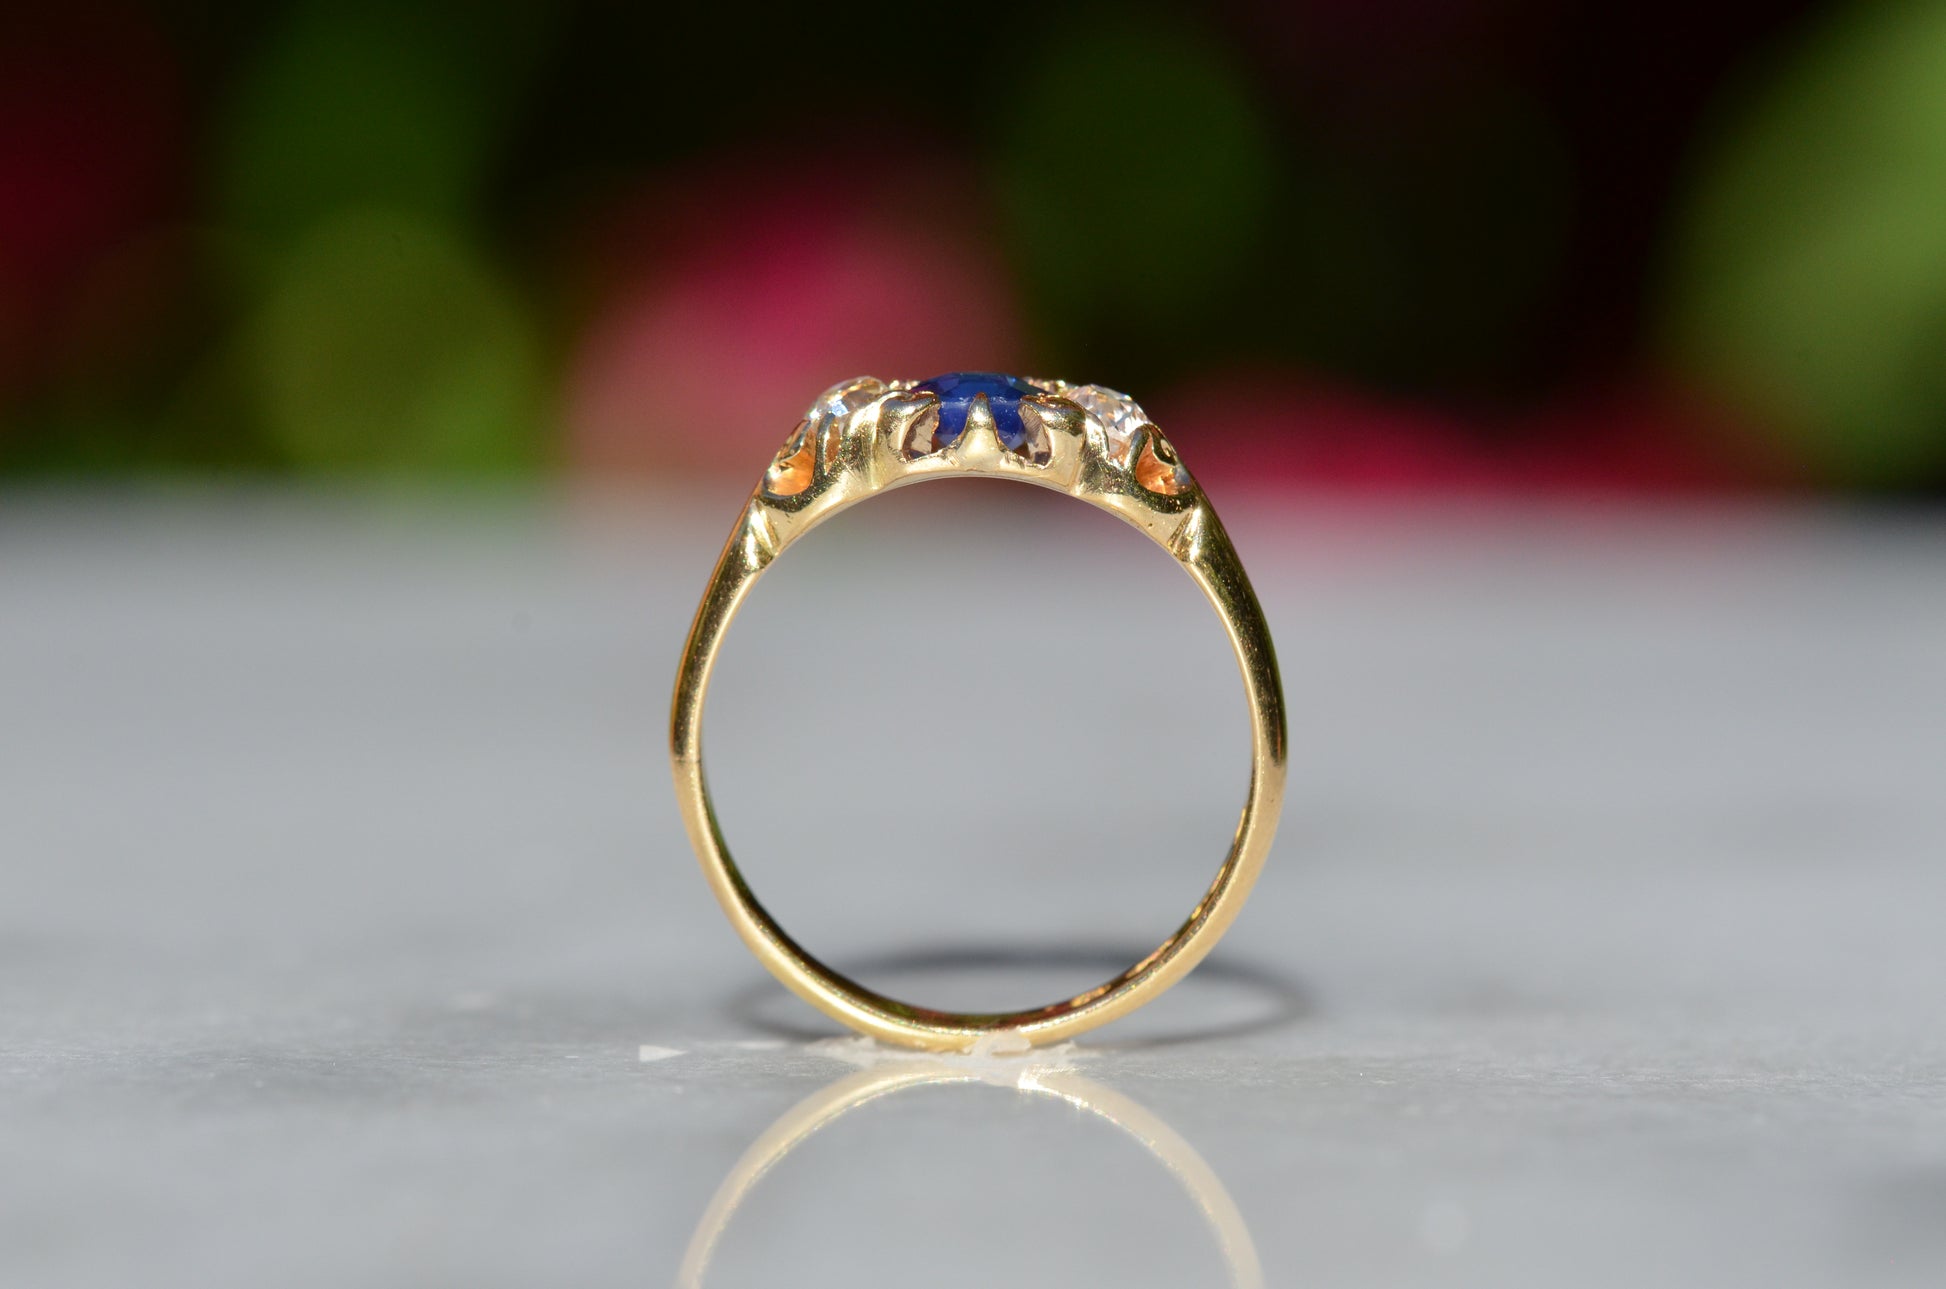 A Victorian ring in yellow gold with swirling shoulders and a central vivid blue sapphire flanked by a pair of old mine cut diamonds, photographed positioned upright looking through the finger hole to showcase the gallery detail and rise off the finger.